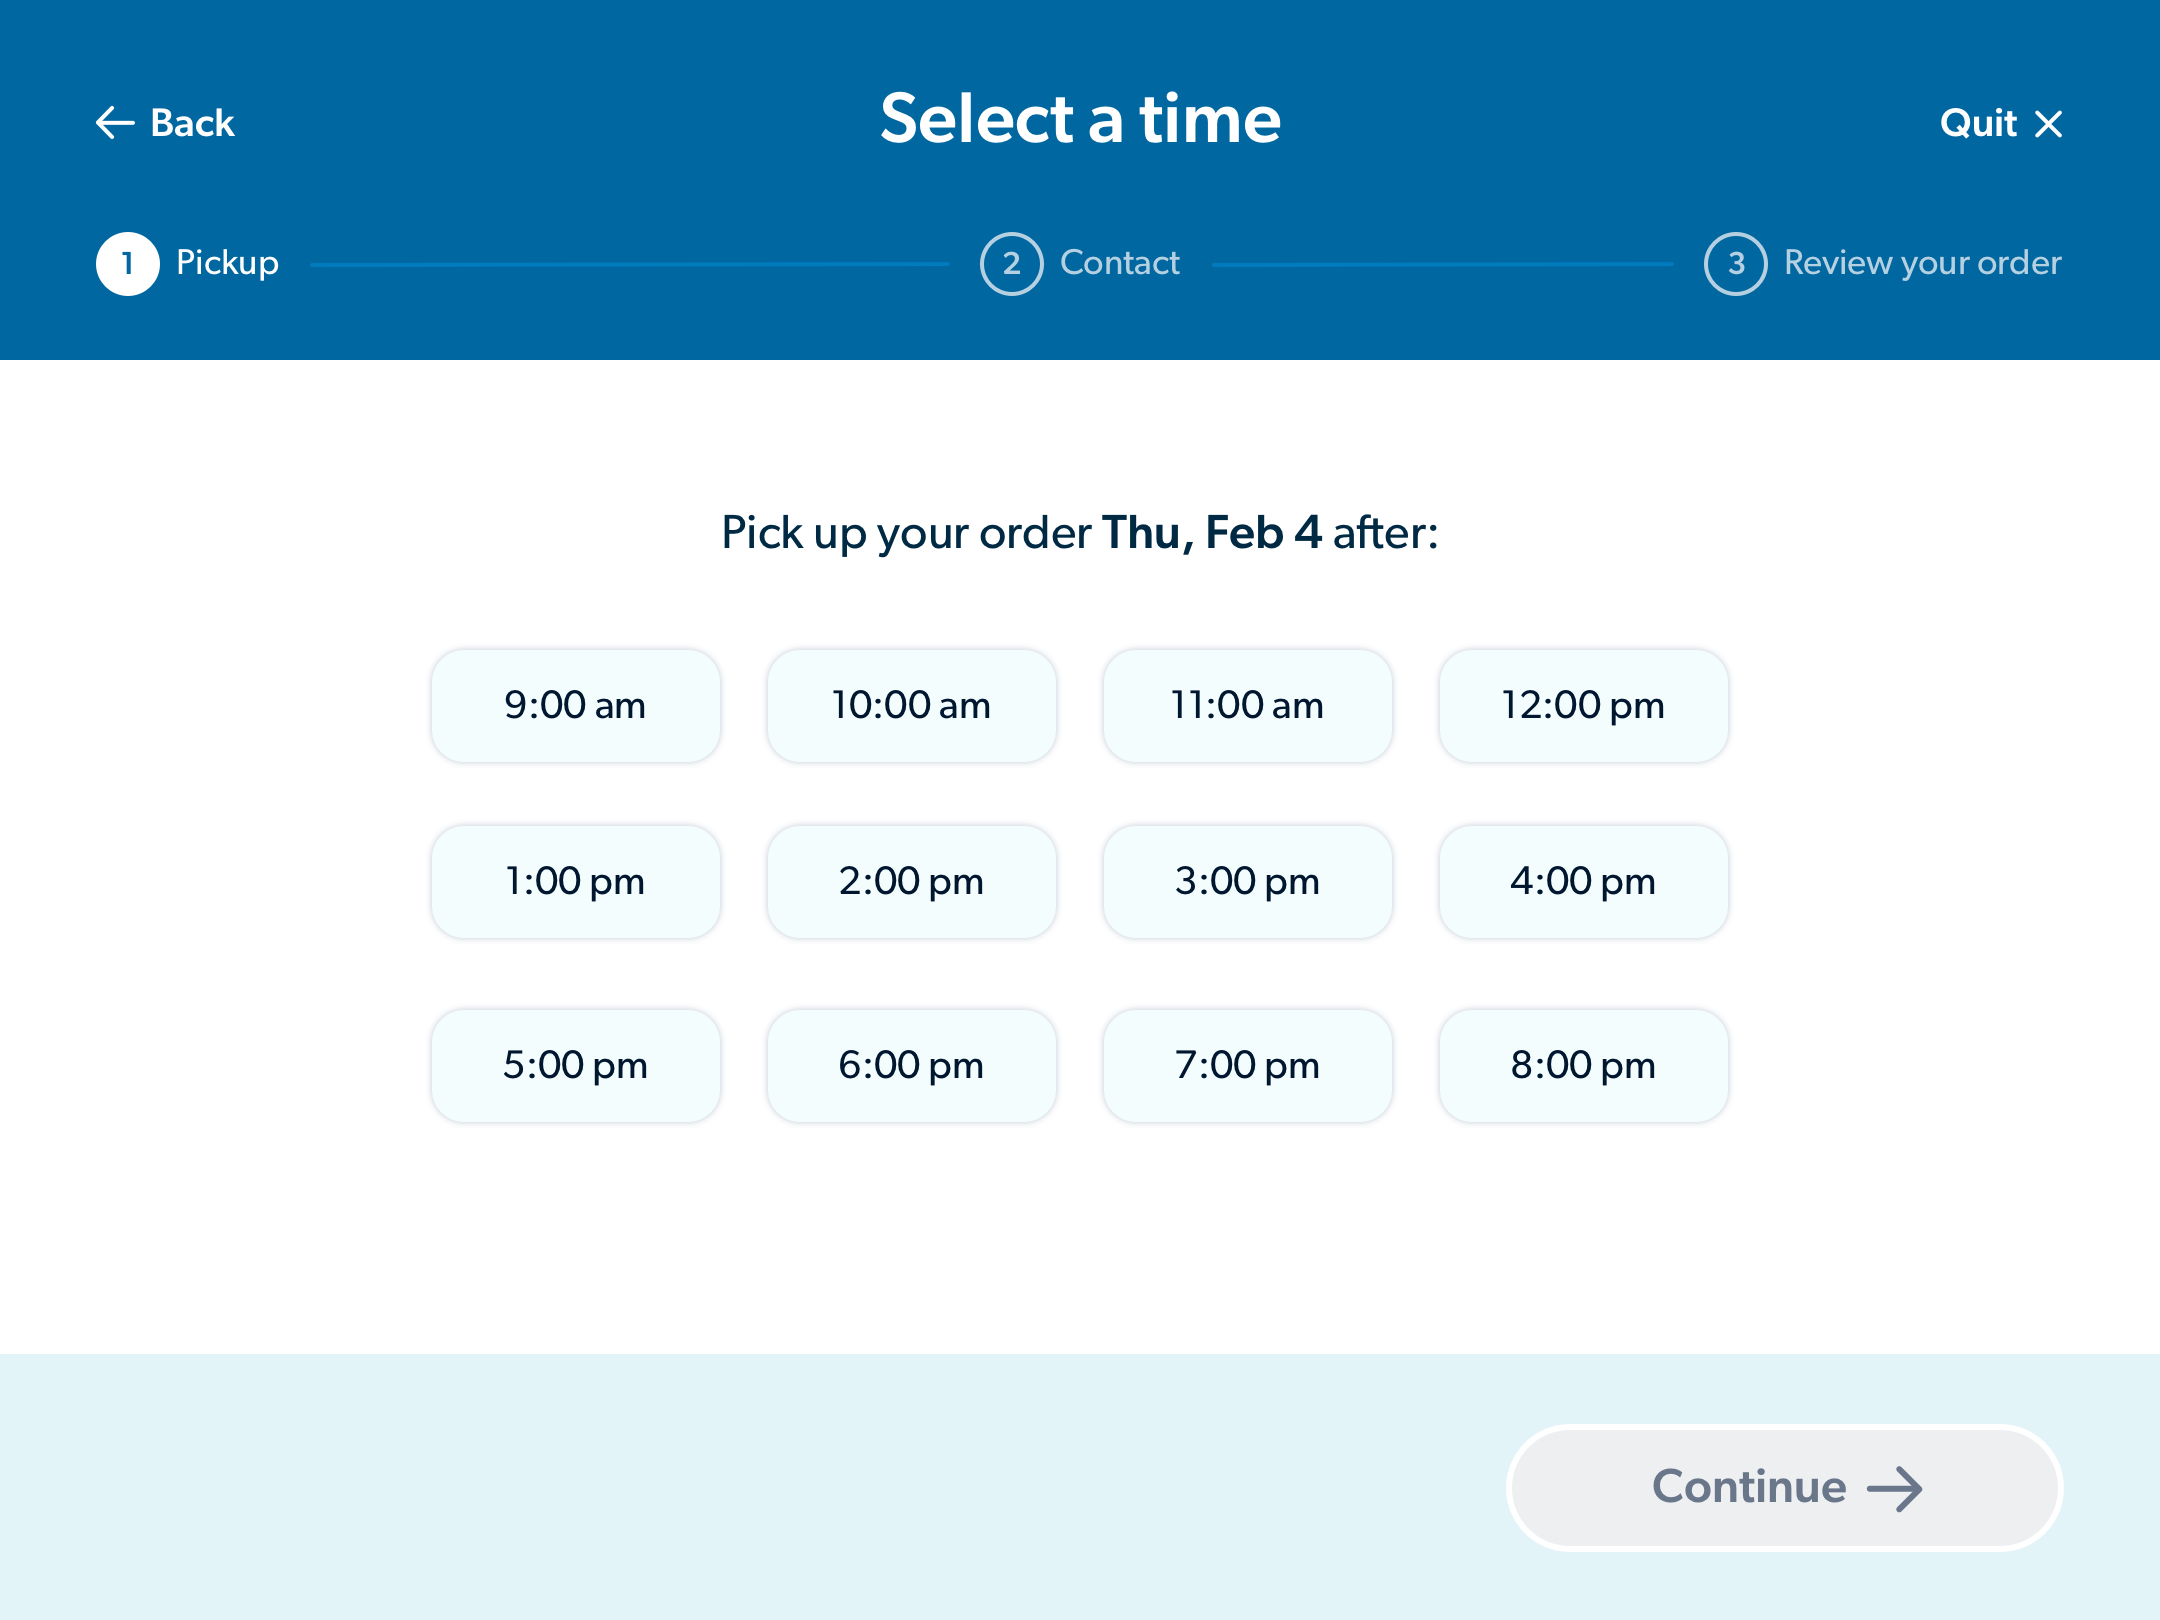 Select a time to pick up your order